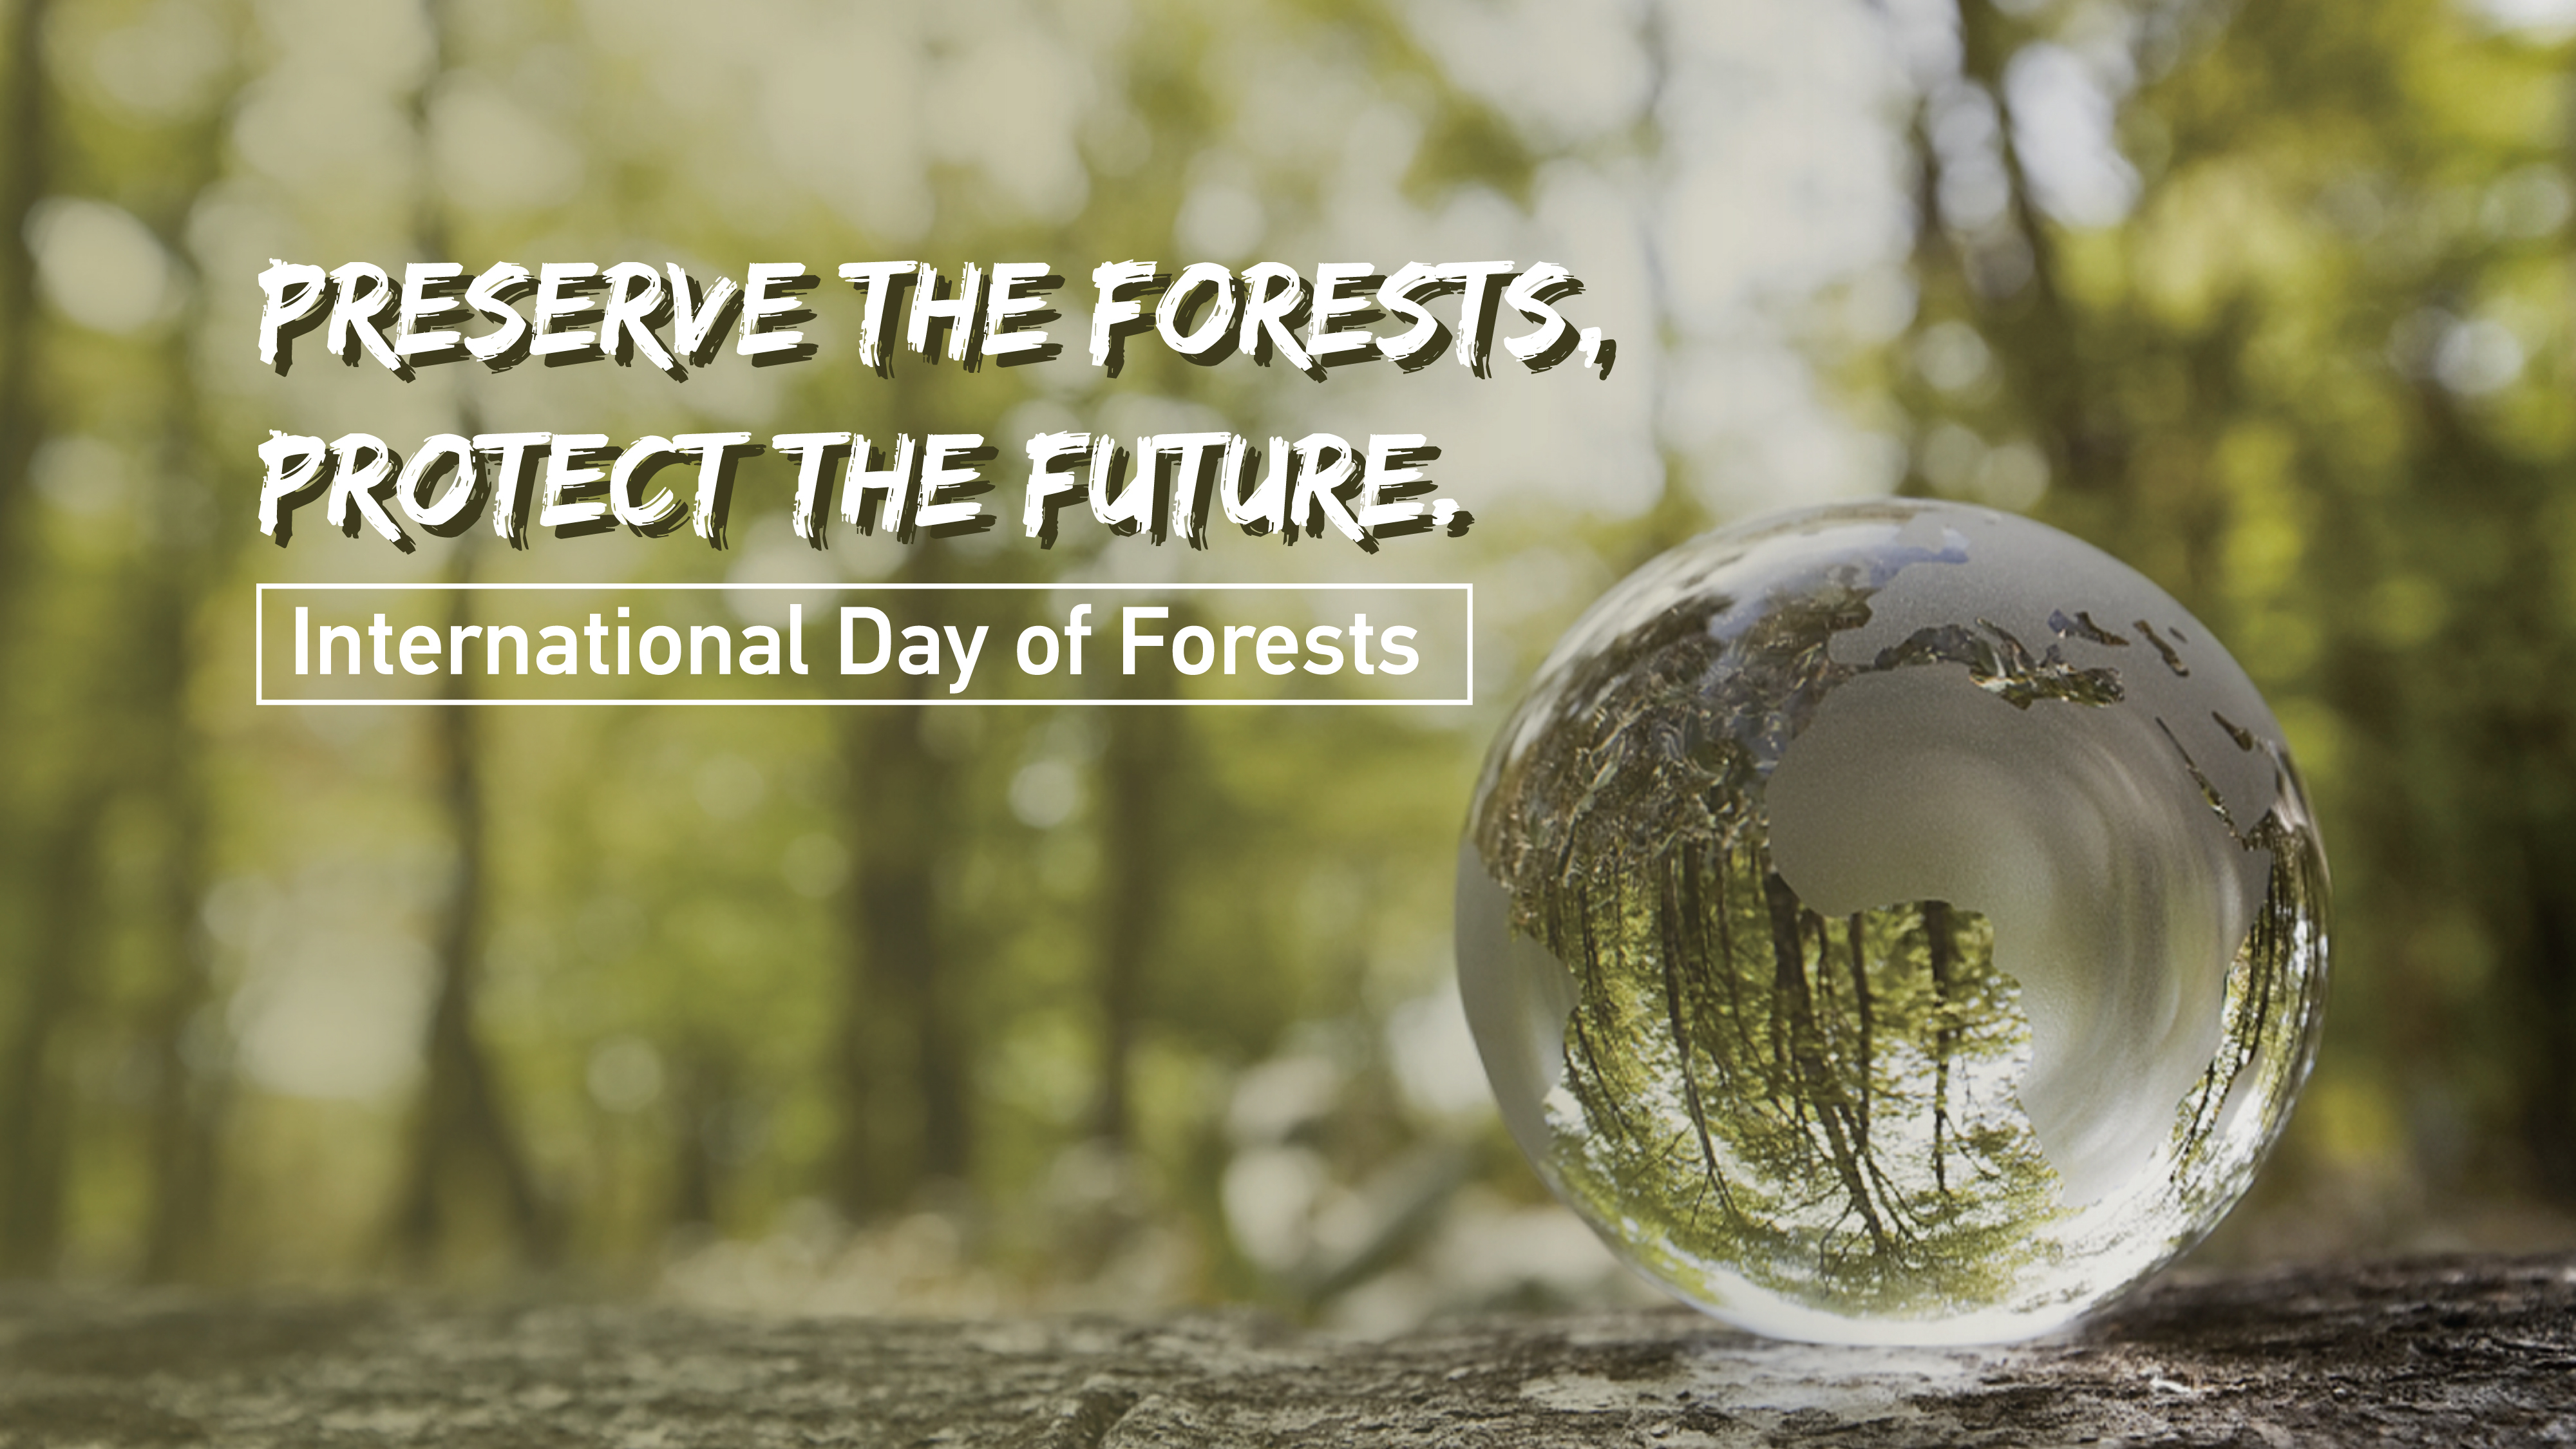 International Day of Forests Preserve the forests, protect the future